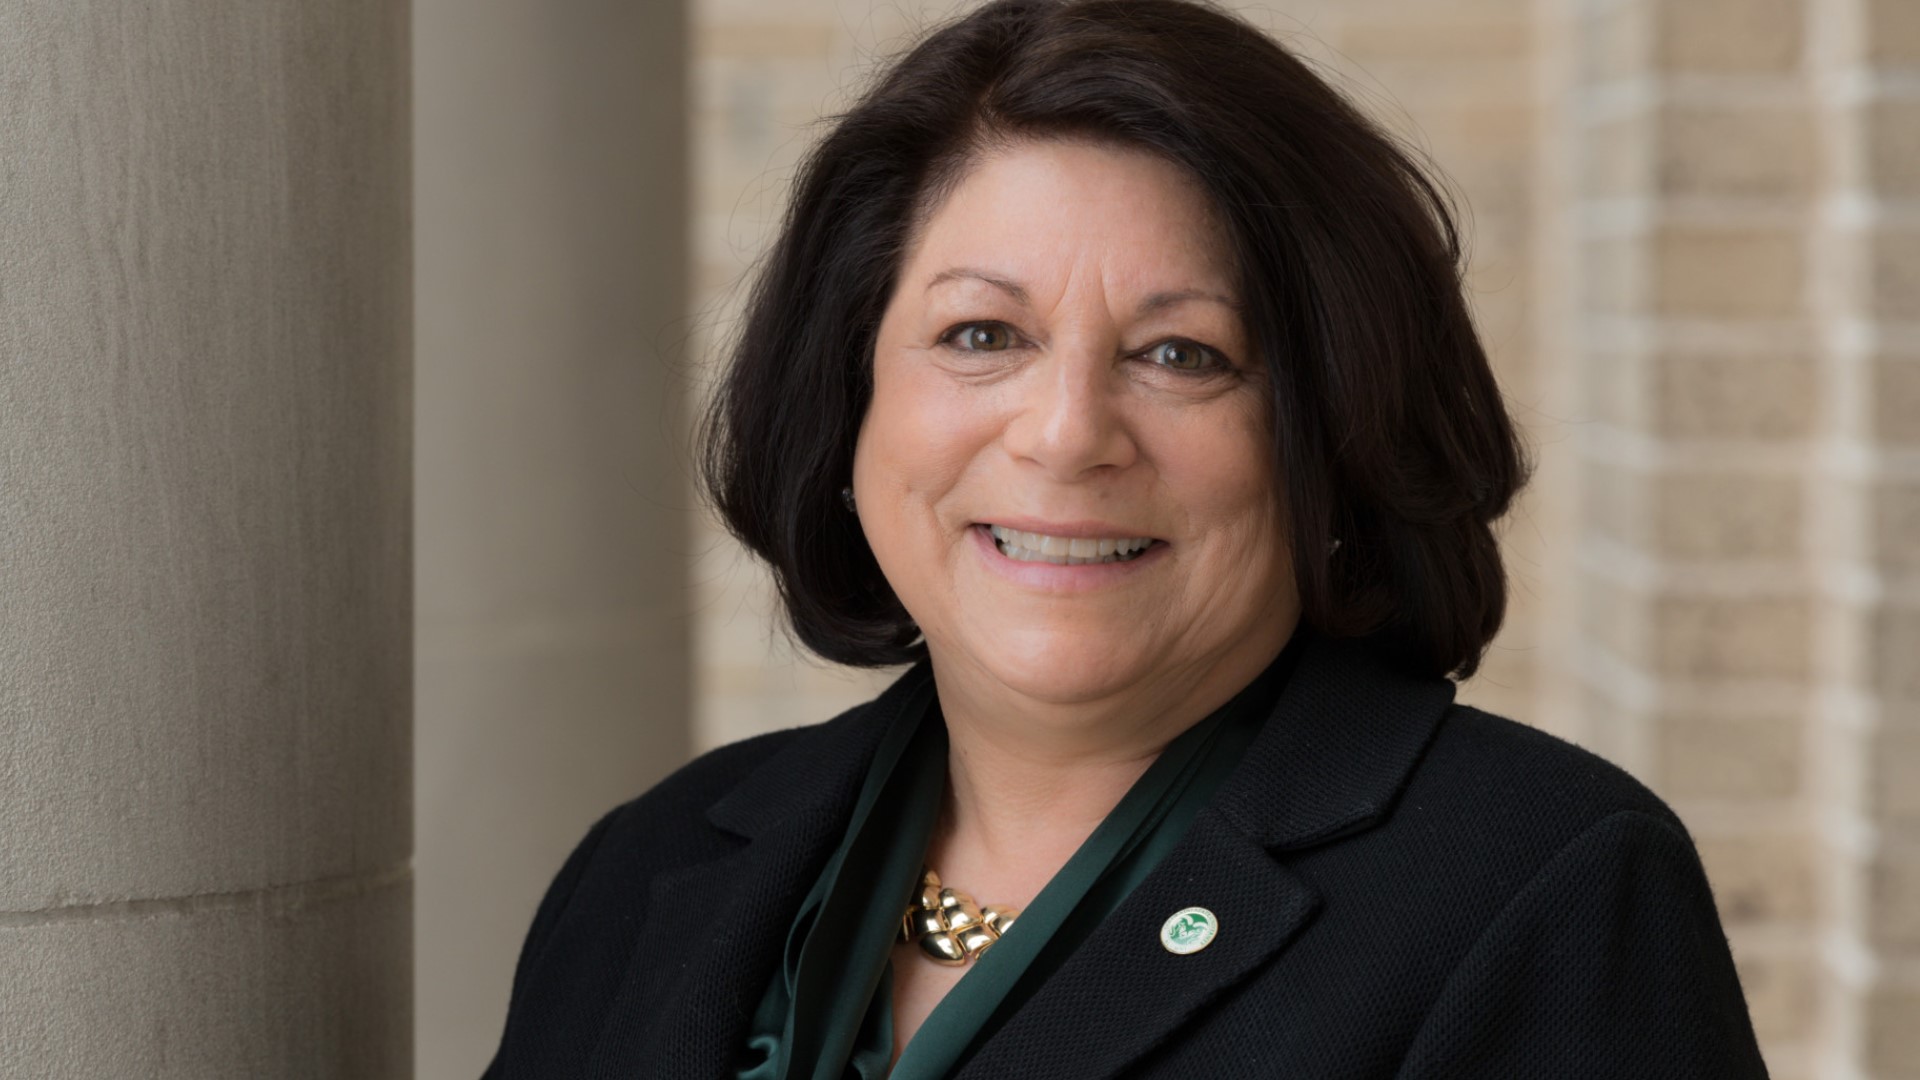 President Joyce McConnell is eager to make her mark on the school. She says her top priority is elevating the university's reputation around the state and the country.